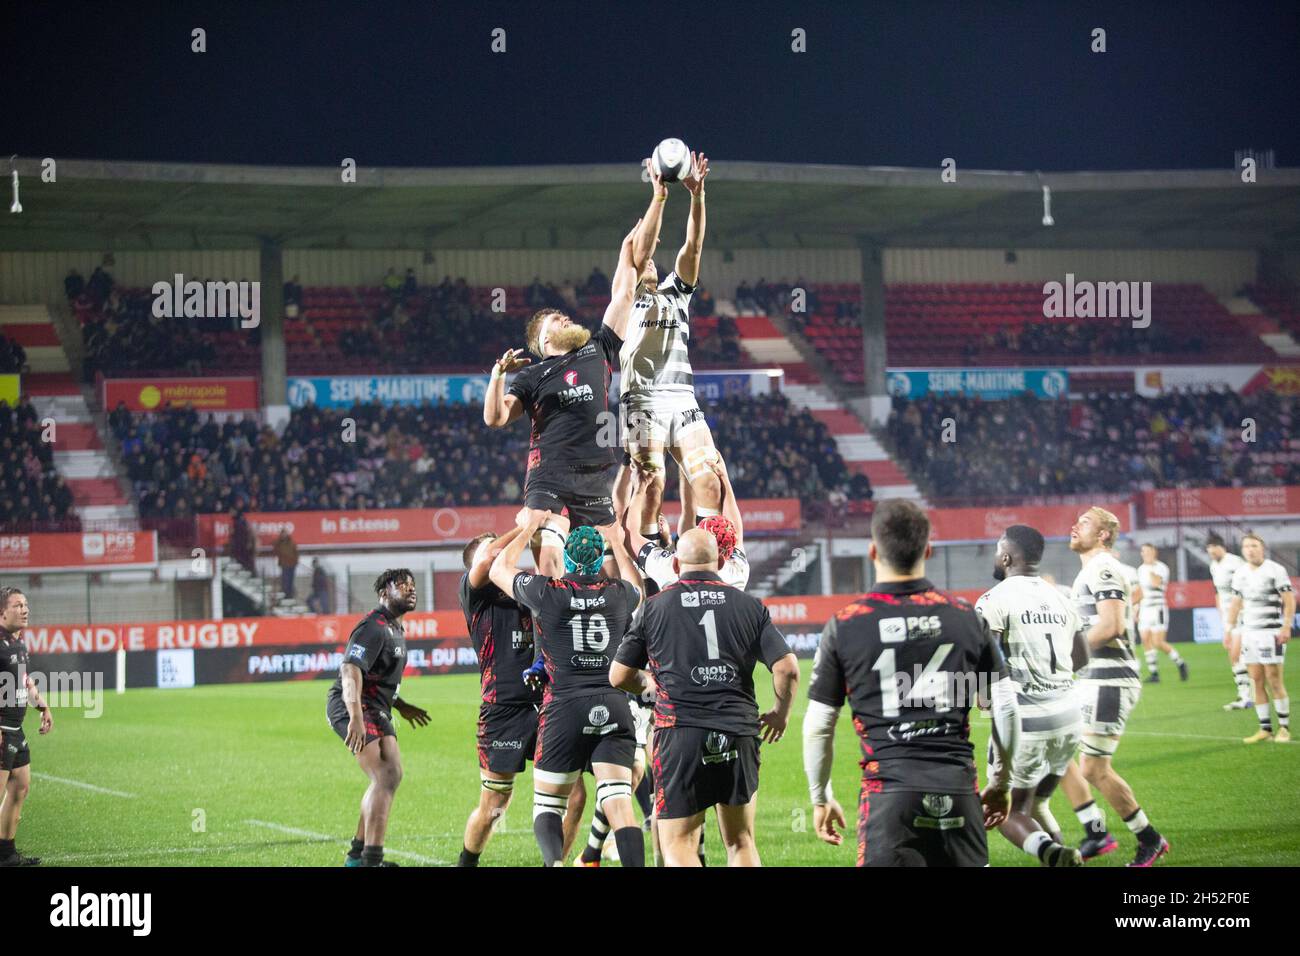 Rouen, France. 05th Nov, 2021. Line out for Gregoire Bazin of Vannes,  John-Charles Astle of Rouen during the French championship Pro D2 rugby  union match between Rouen Normandie and RC Vannes on